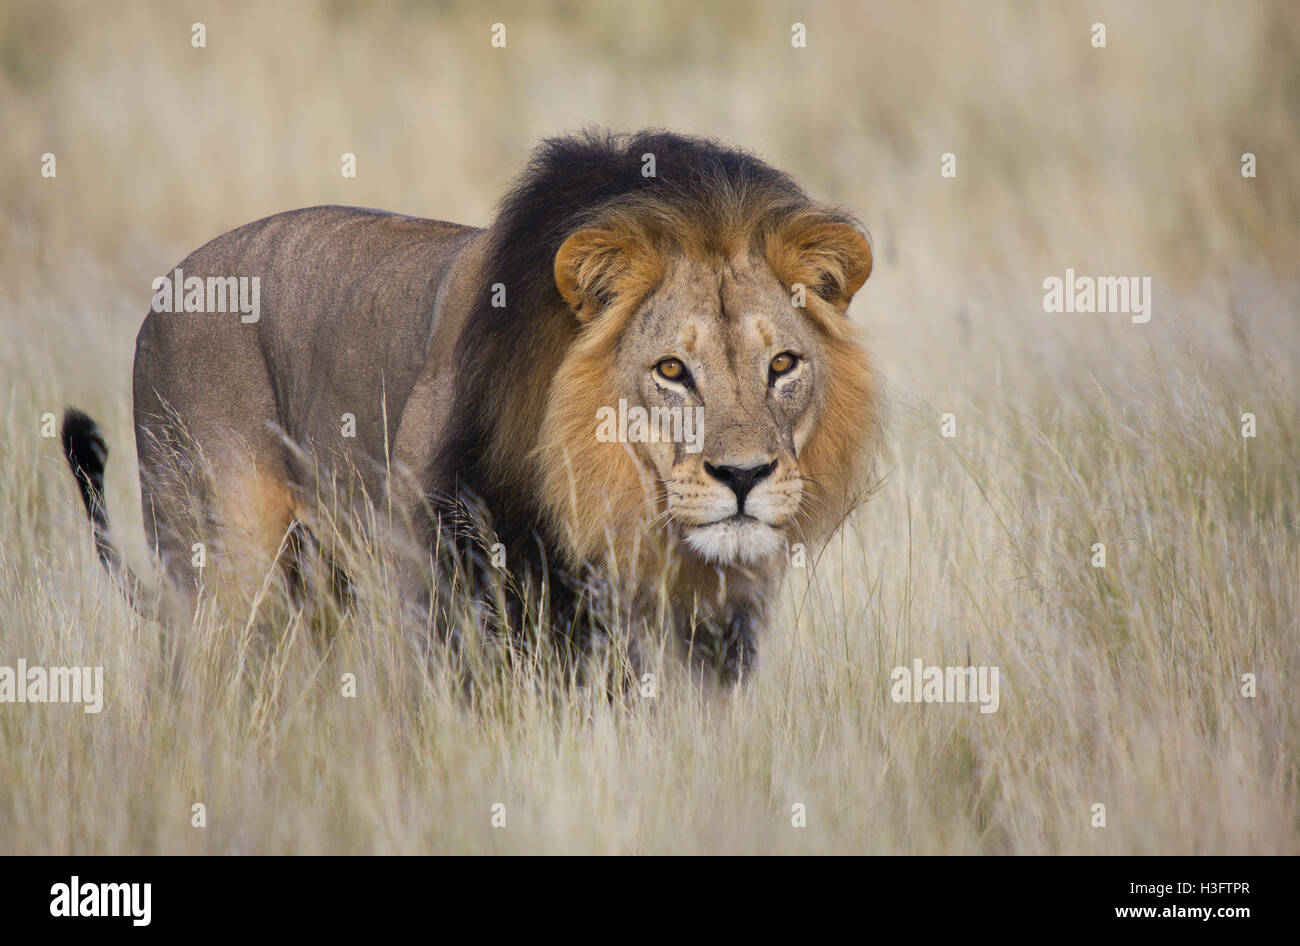 Male lion isolated in tall grass with eye contact Stock Photo